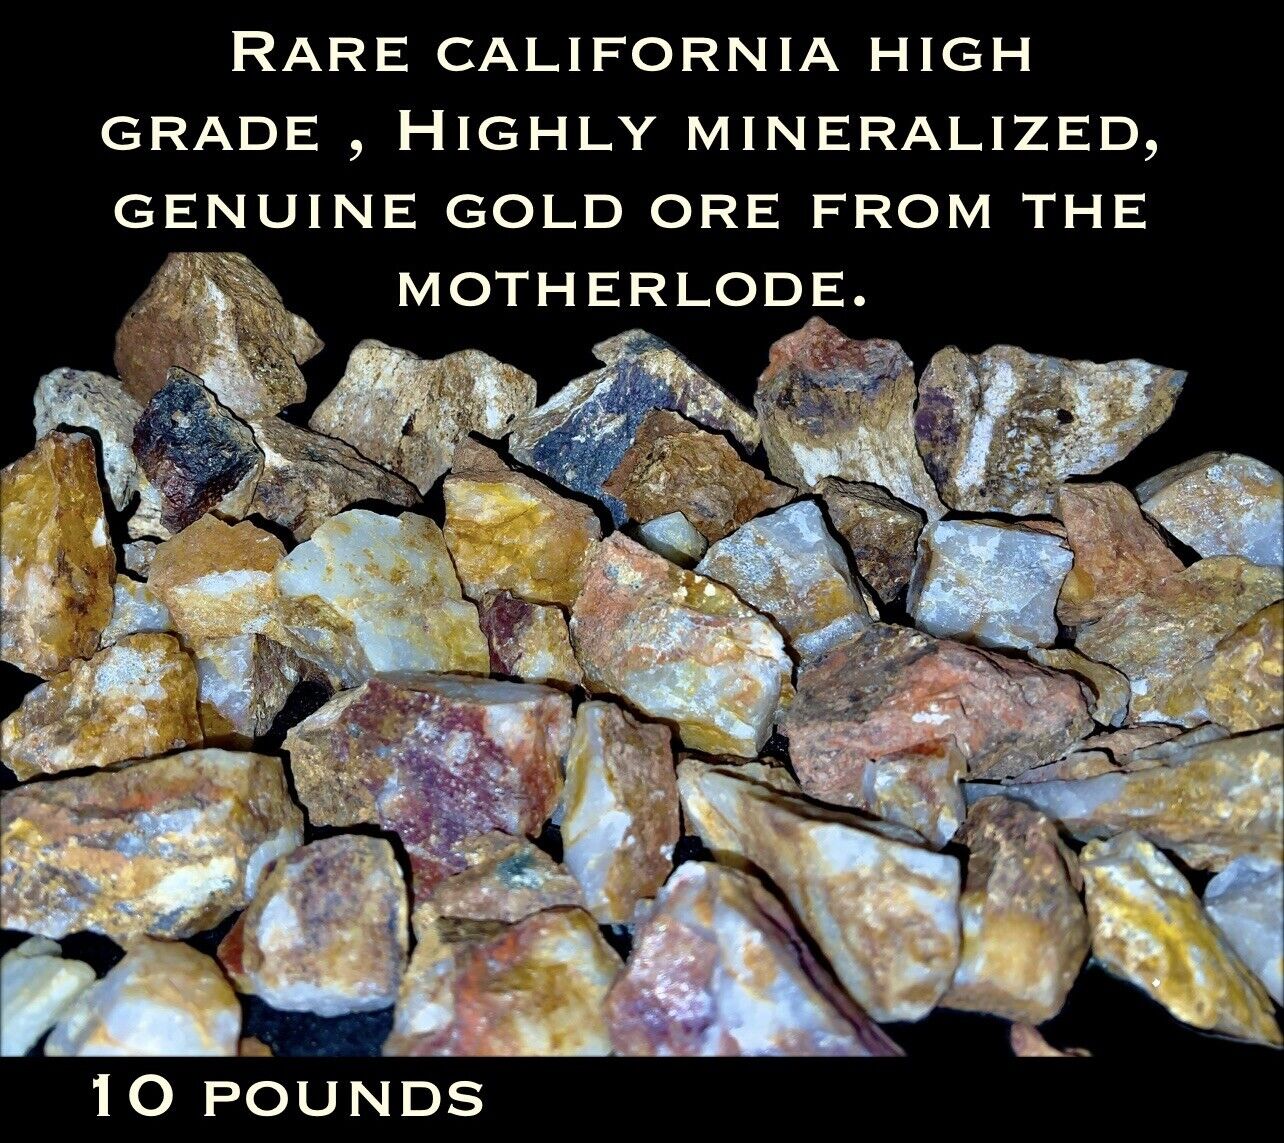 10LB HIGH GRADE HIGHLY MINERALIZED GOLD ORE W/VISIBLE GOLD FROM THE MOTHERLODE